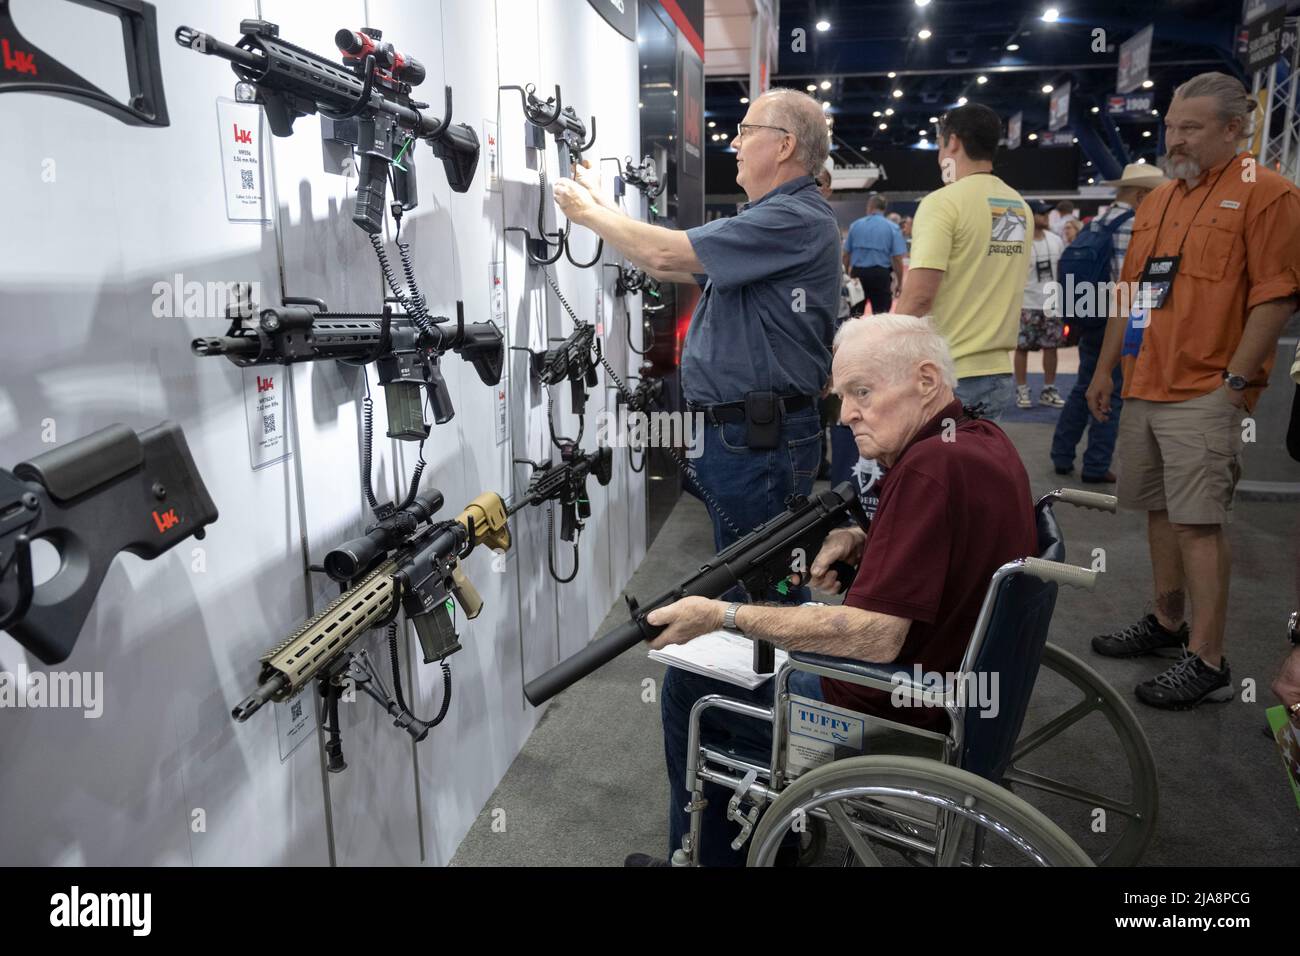 Houston, Texas United States, 28th May 2022: Gun enthusiasts shop for firearms, ammunition and outdoor products at the HK booth on Saturday morning at the National Rifle Association's (NRA) trade show. The exhibits cover almost 14 acres inside the George R. Brown Convention Center. Credit: Bob Daemmrich/Alamy Live News Stock Photo